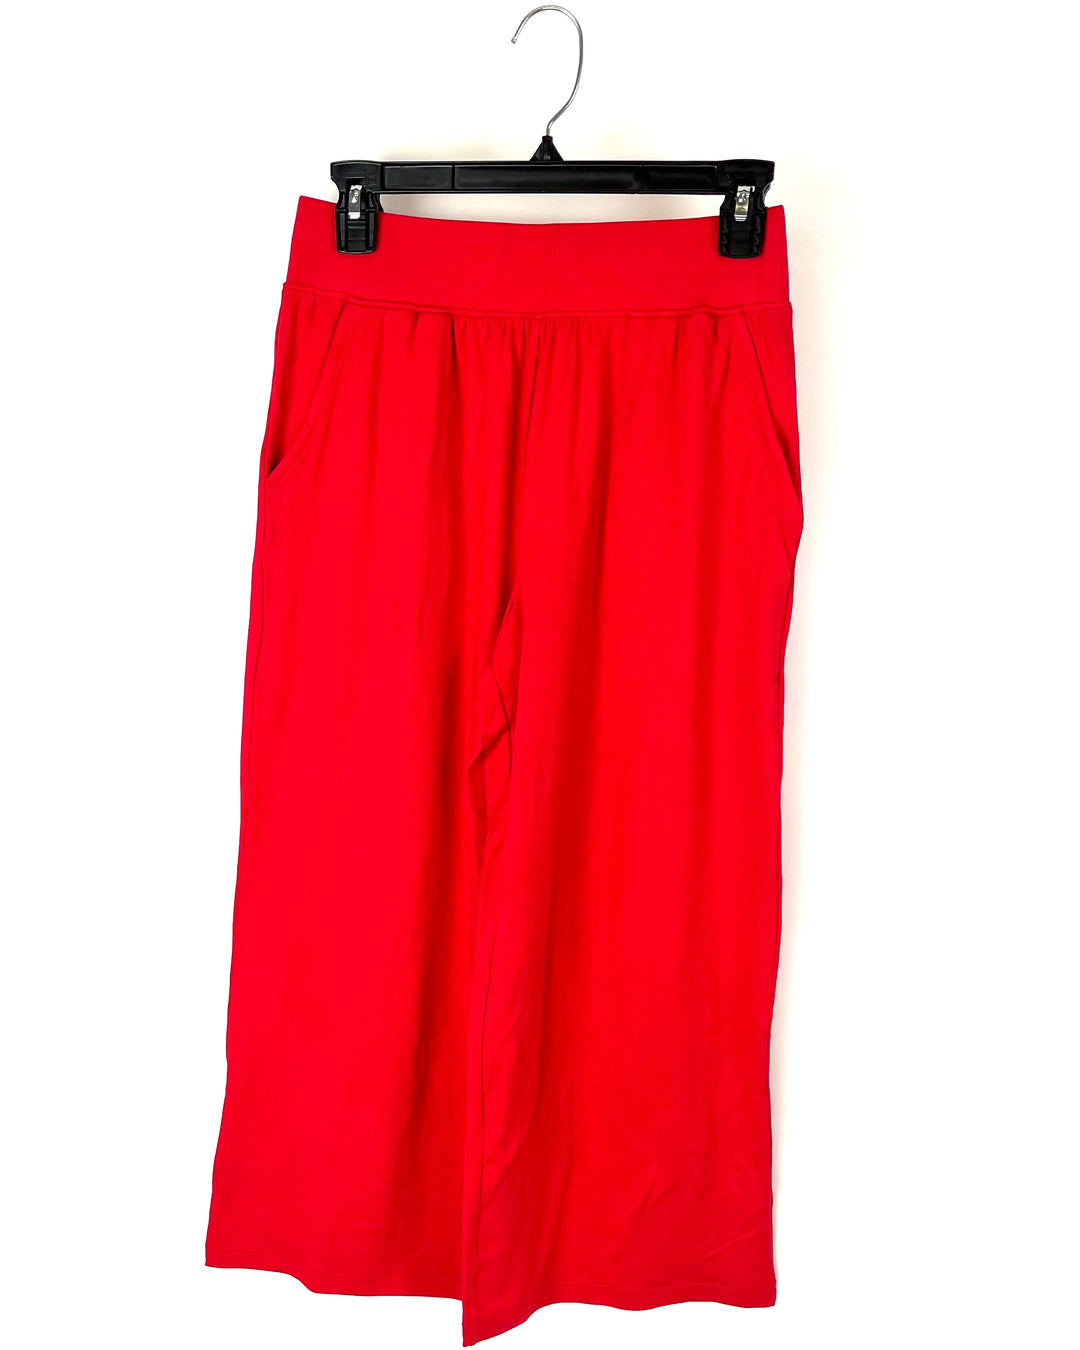 Red Flowy Lounge Pants - Size 6/8